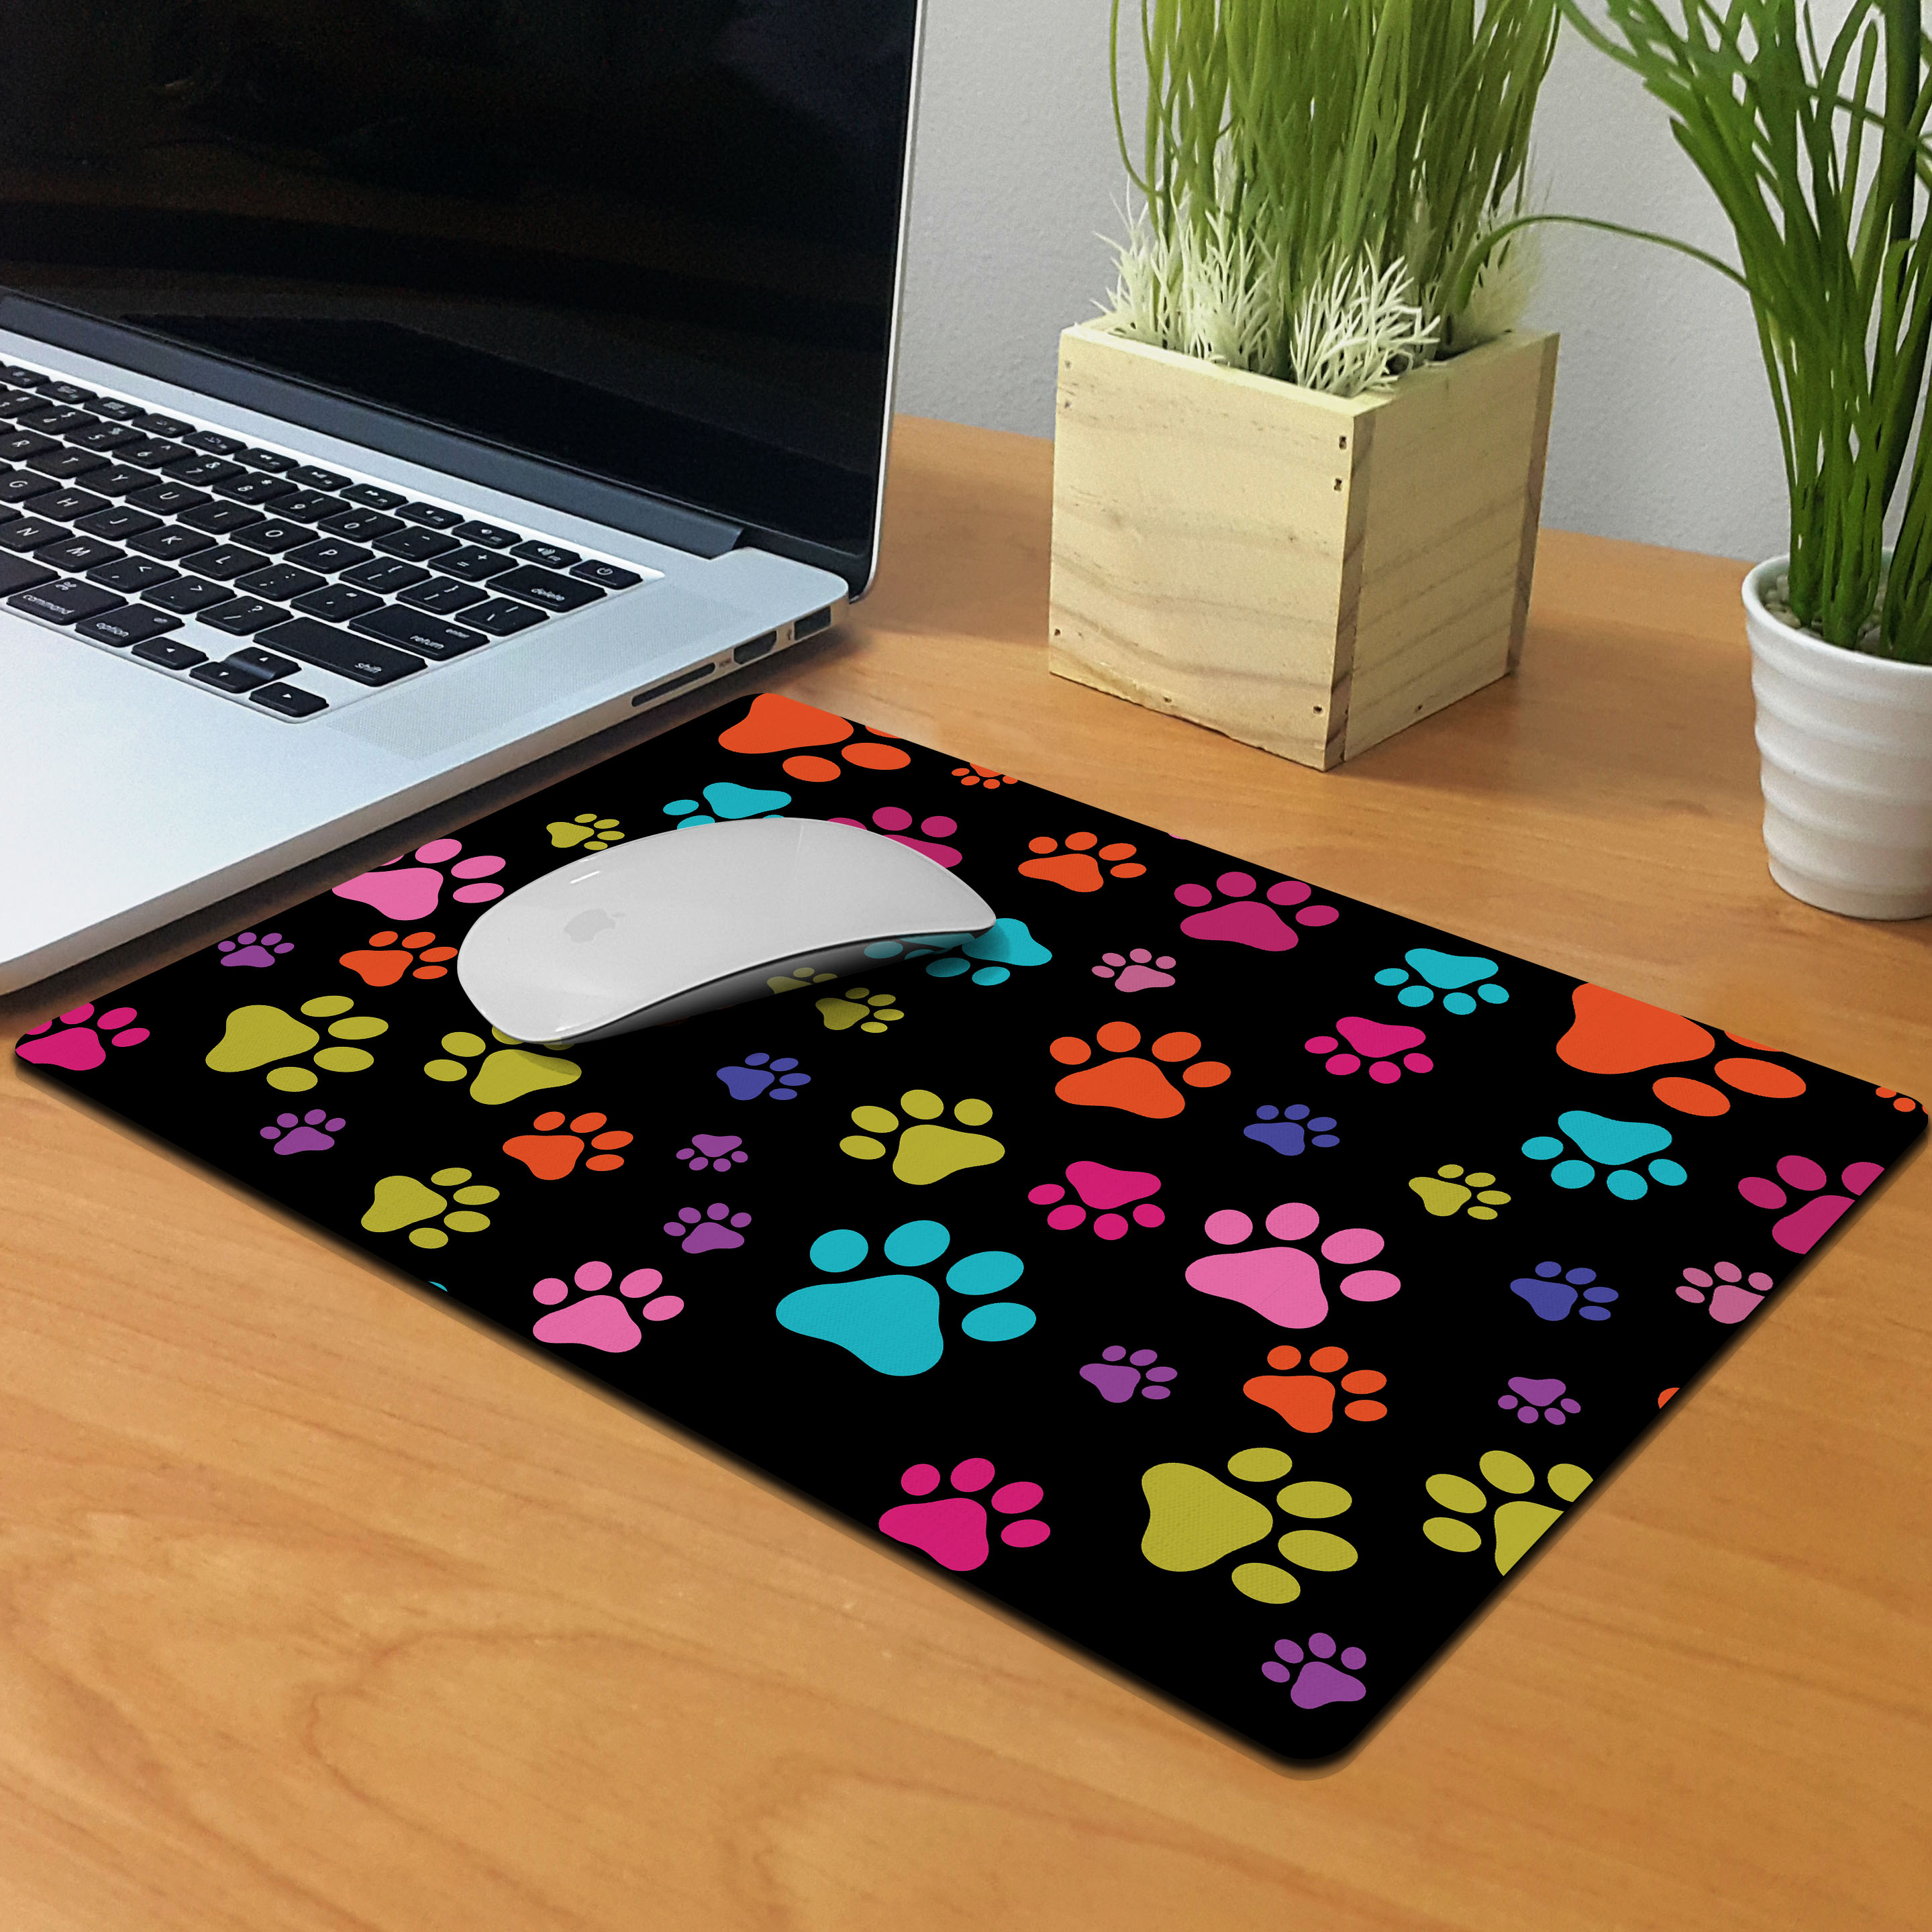 FINCIBO Super Size Rectangle Mouse Pad, Non-Slip X-Large Mouse Pad for Home, Office, and Gaming Desk, Multicolor Paws Dog - image 4 of 5